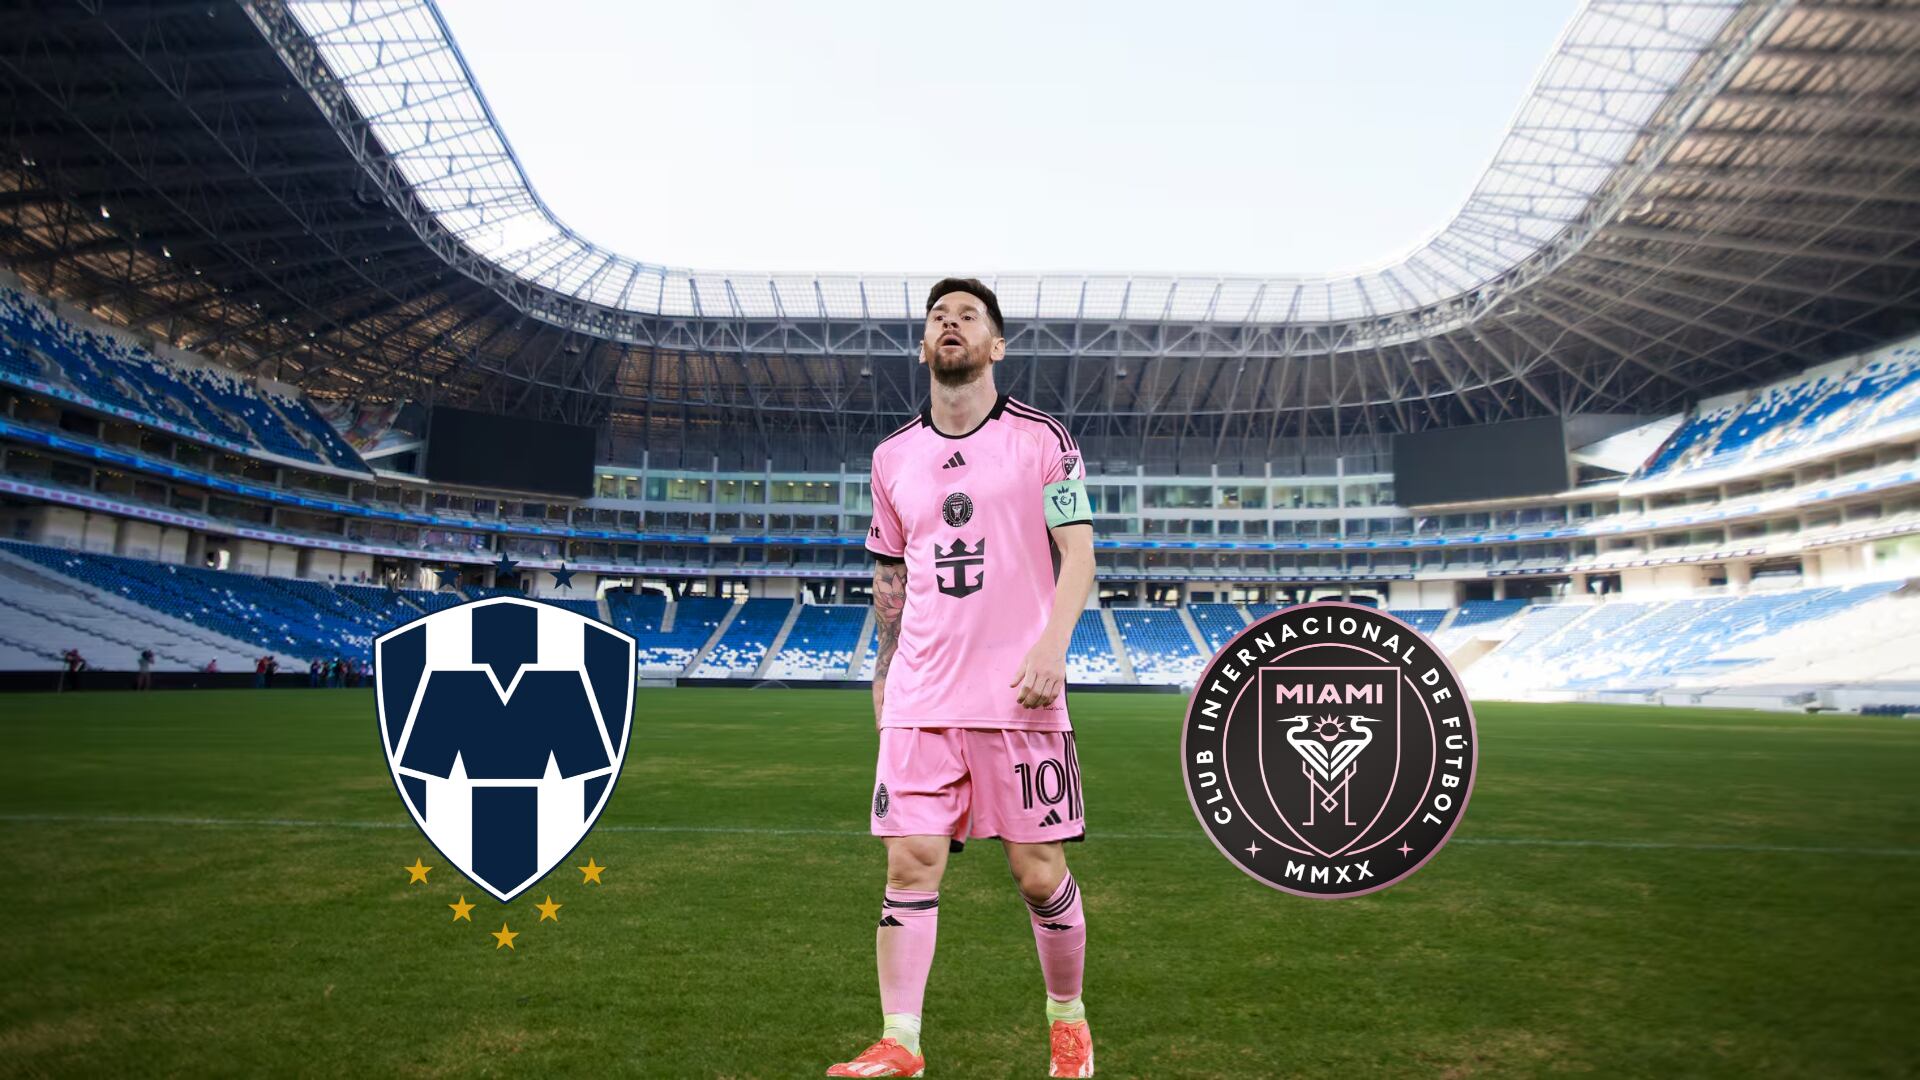 (VIDEO) What they did to Messi at Monterrey Stadium that no one has done before